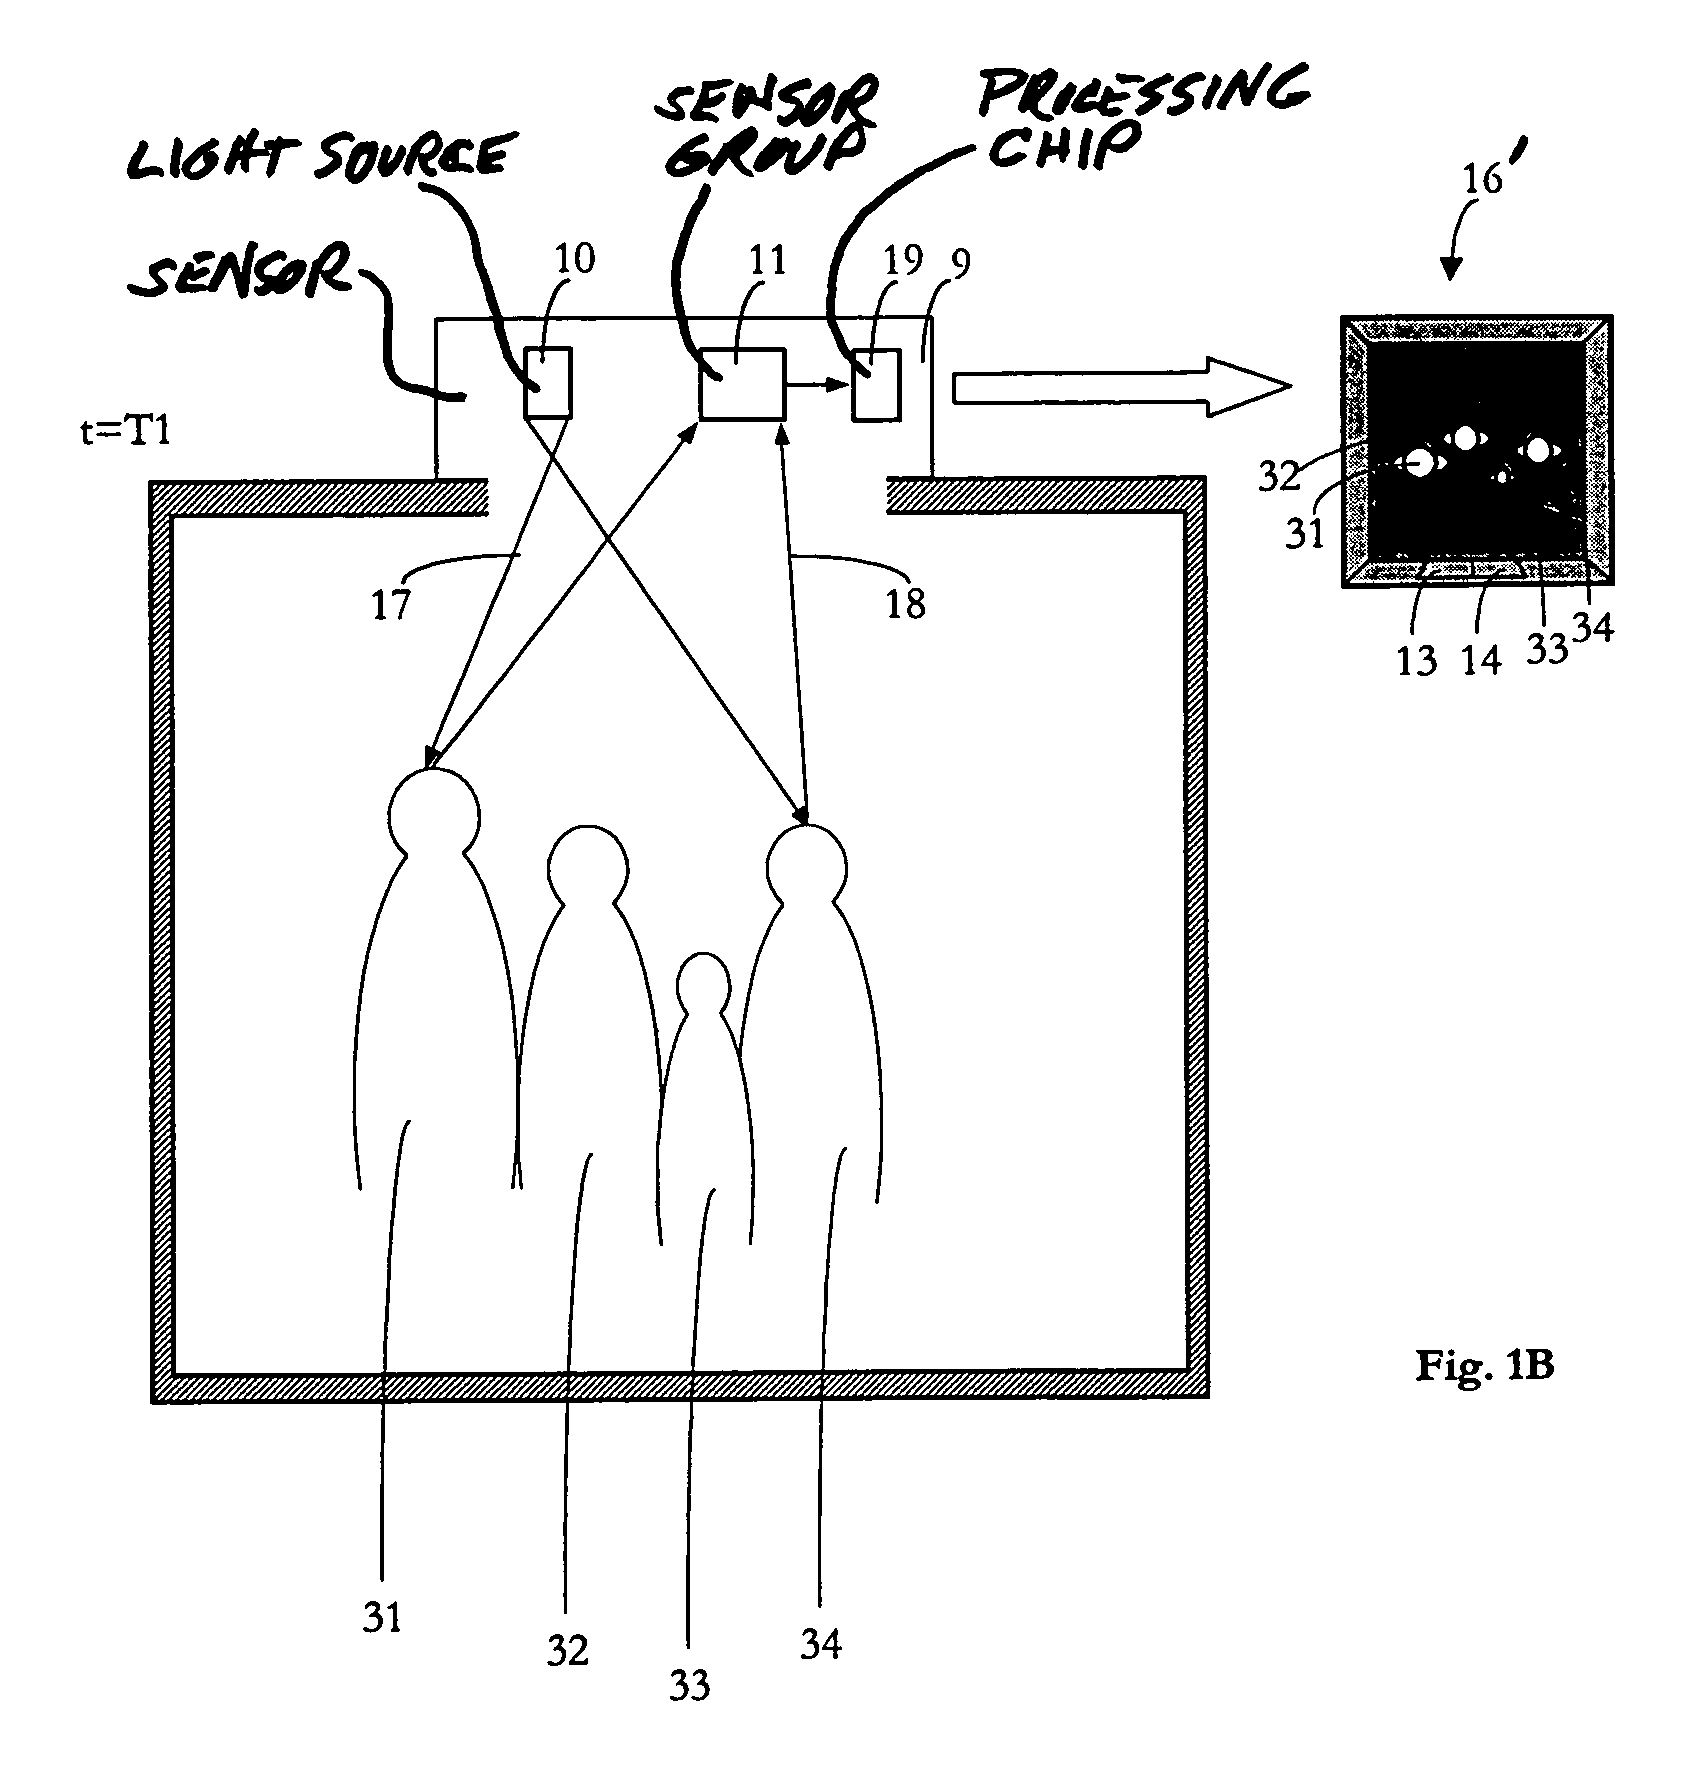 Three-dimensional monitoring in the area of an elevator by means of a three-dimensional sensor